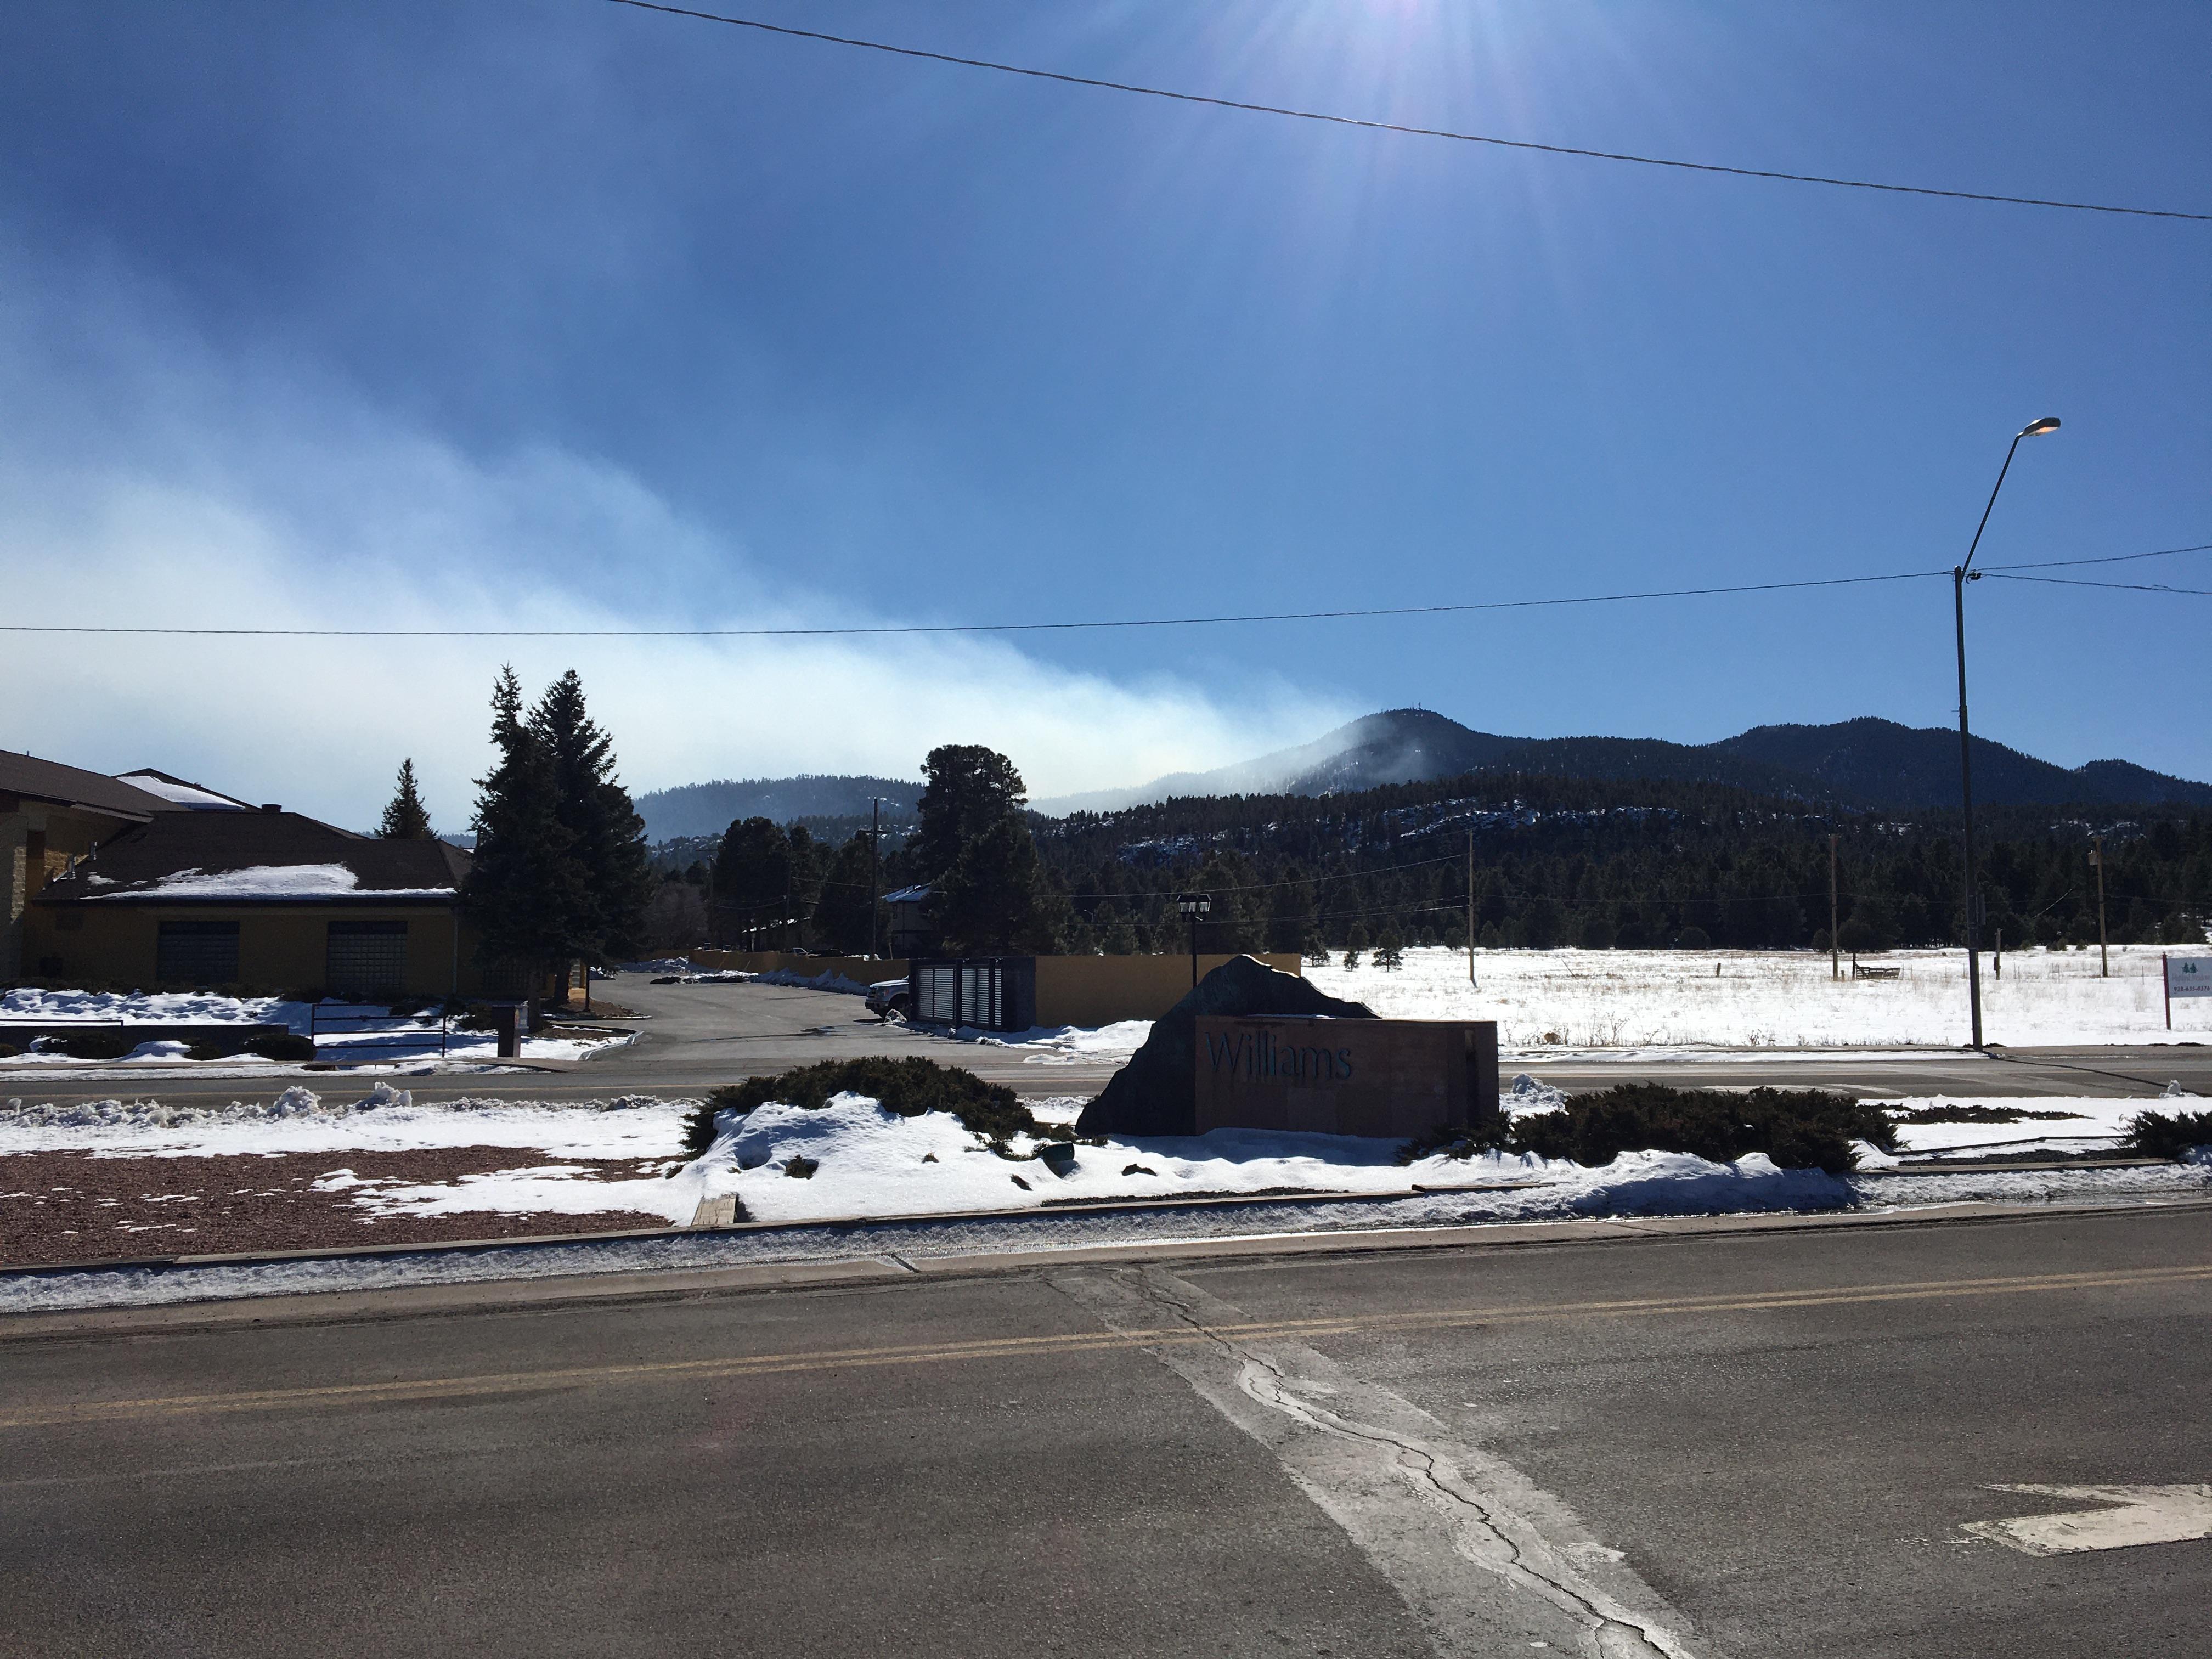 Smoke As Seen from City of Williams